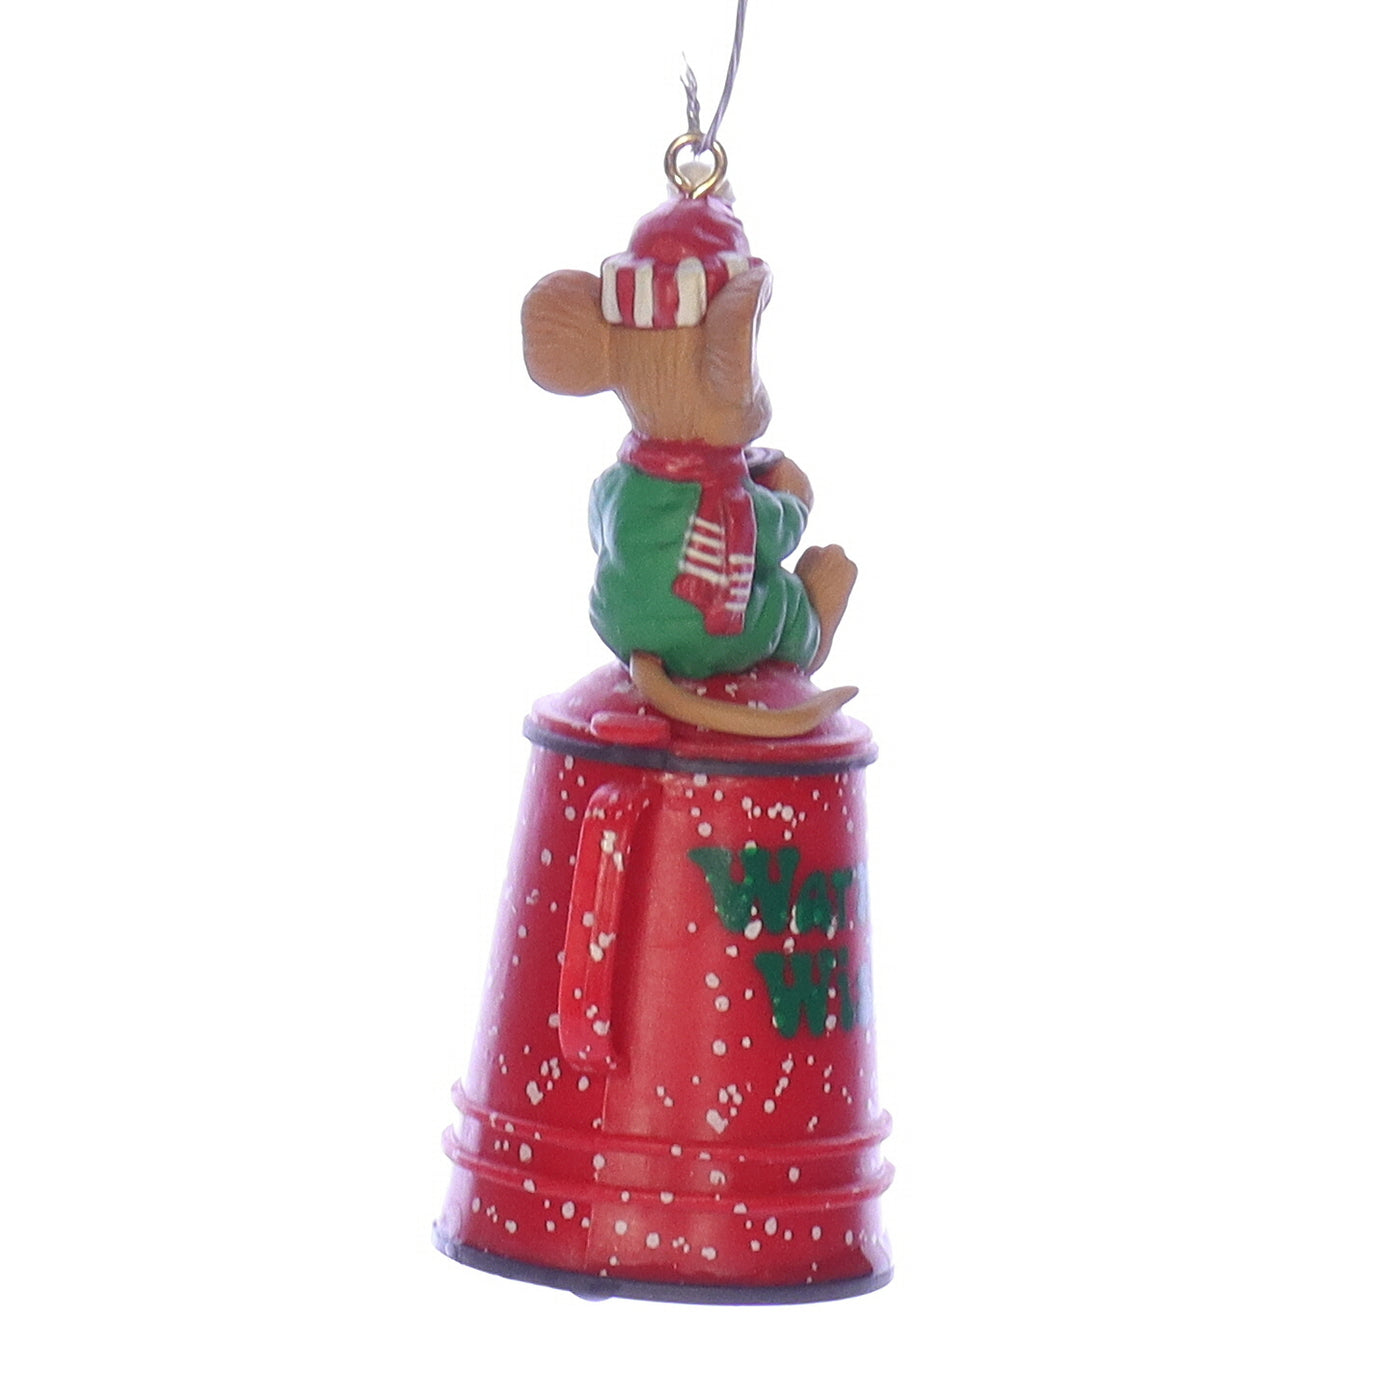 Enesco_Treasury_of_Christmas_Ornaments_564974_Brewing_Warm_Wishes_Mouse_Ornament_1991 Back View